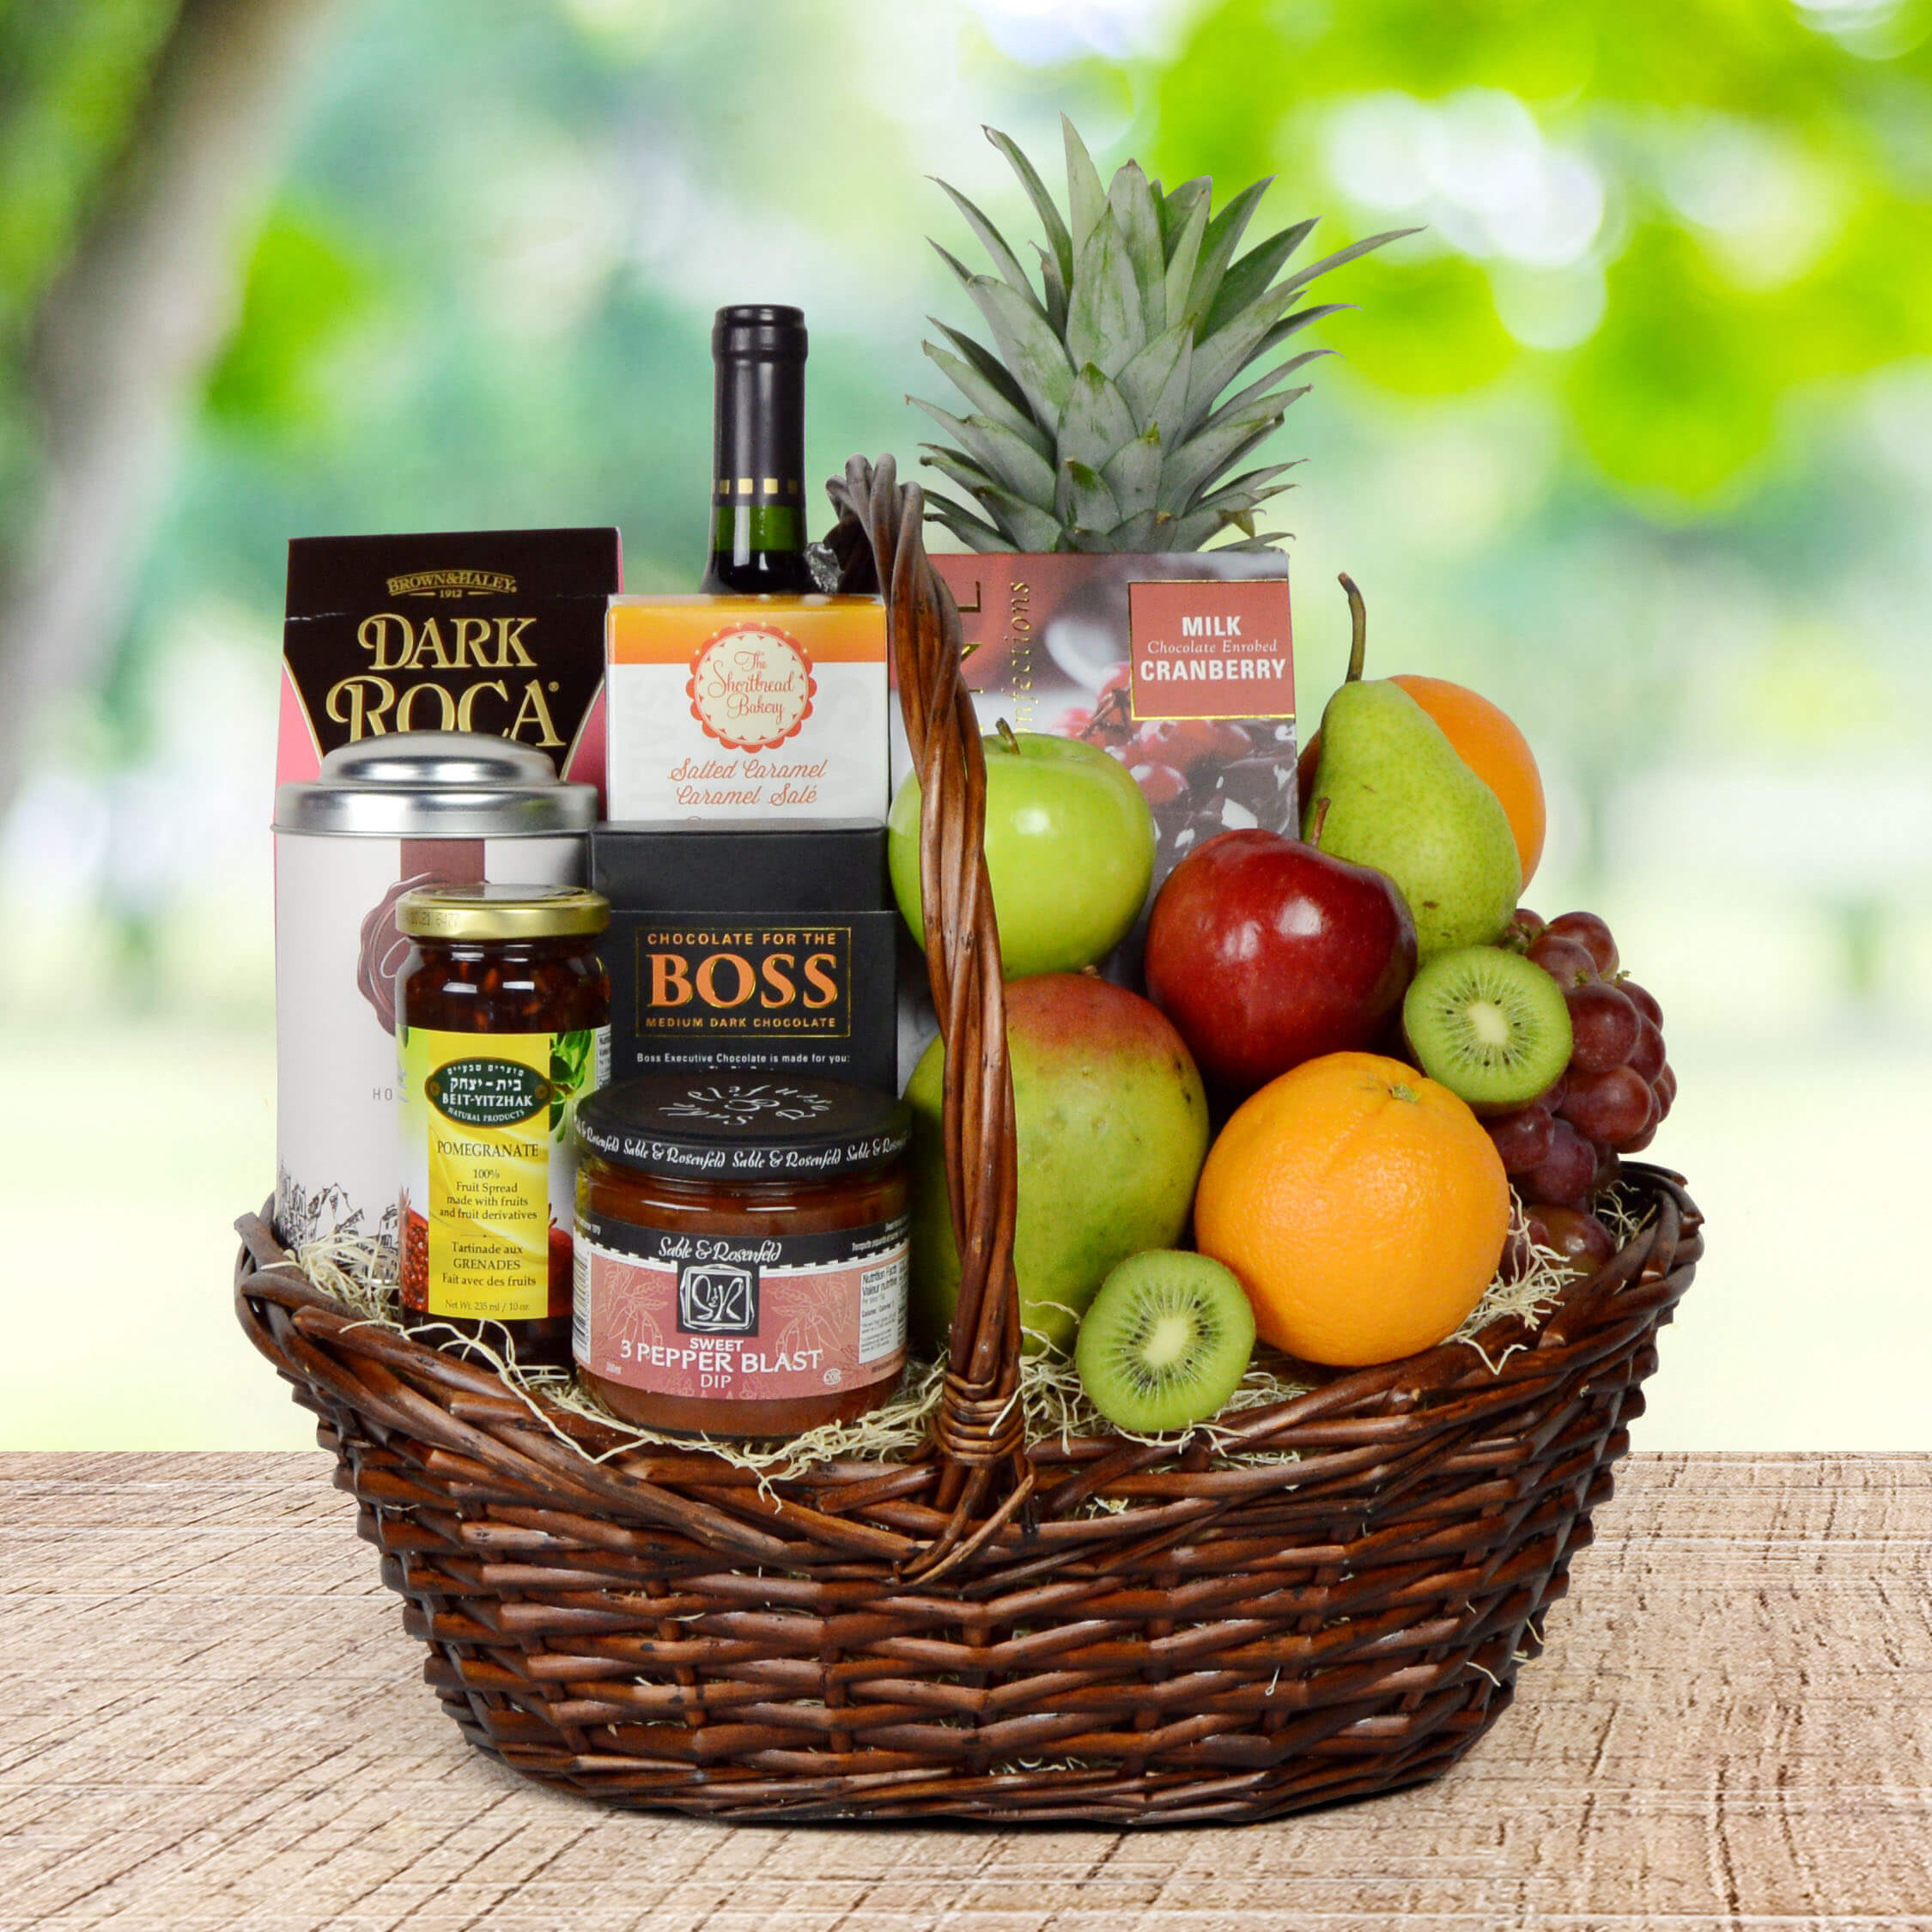 The Wholesome Kosher Gift Basket